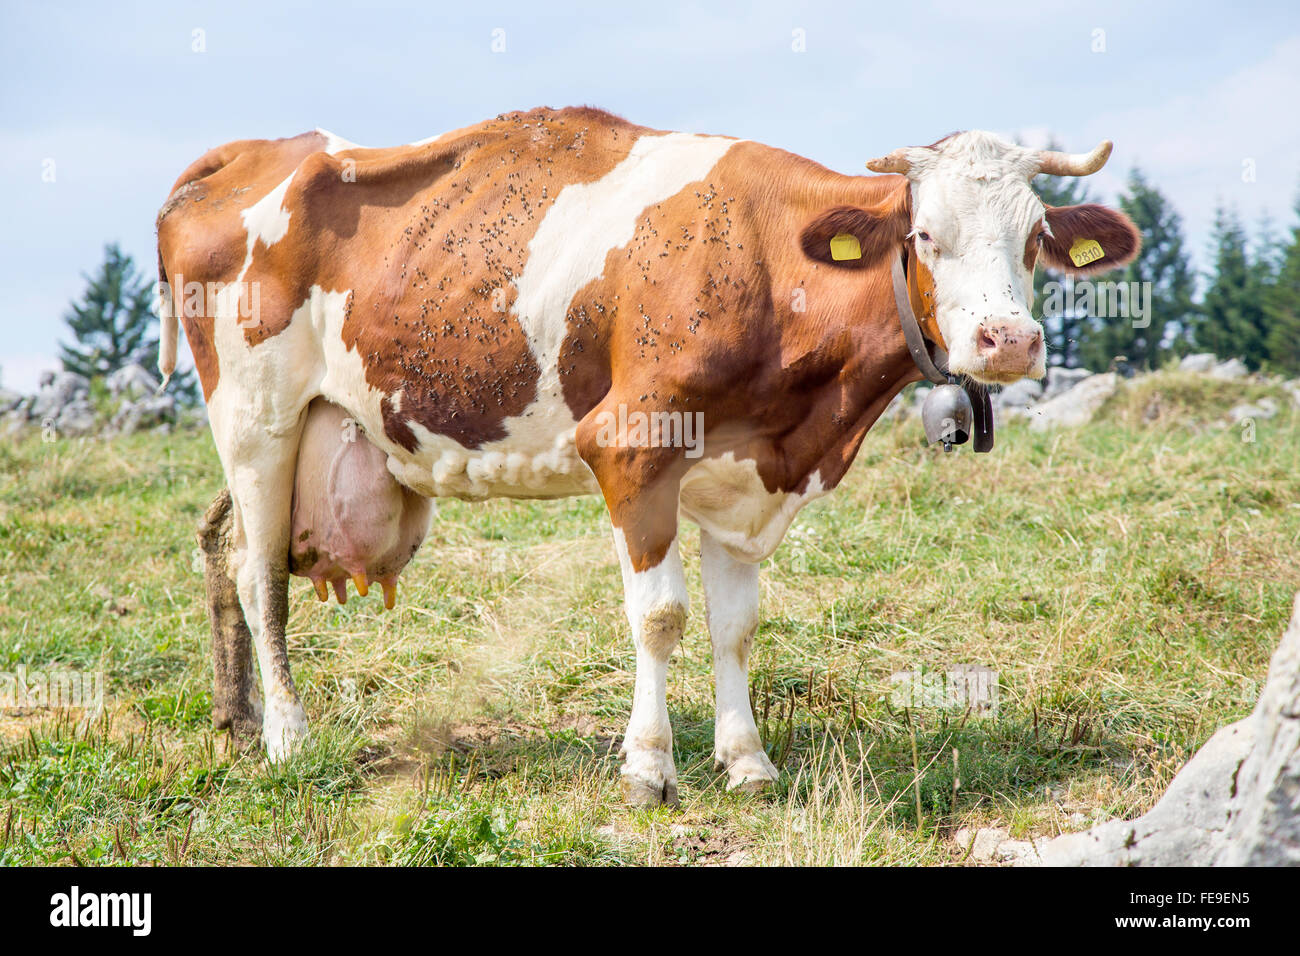 A skinny cow standing and looking at camera with a bell around the neck and covered by flies Stock Photo